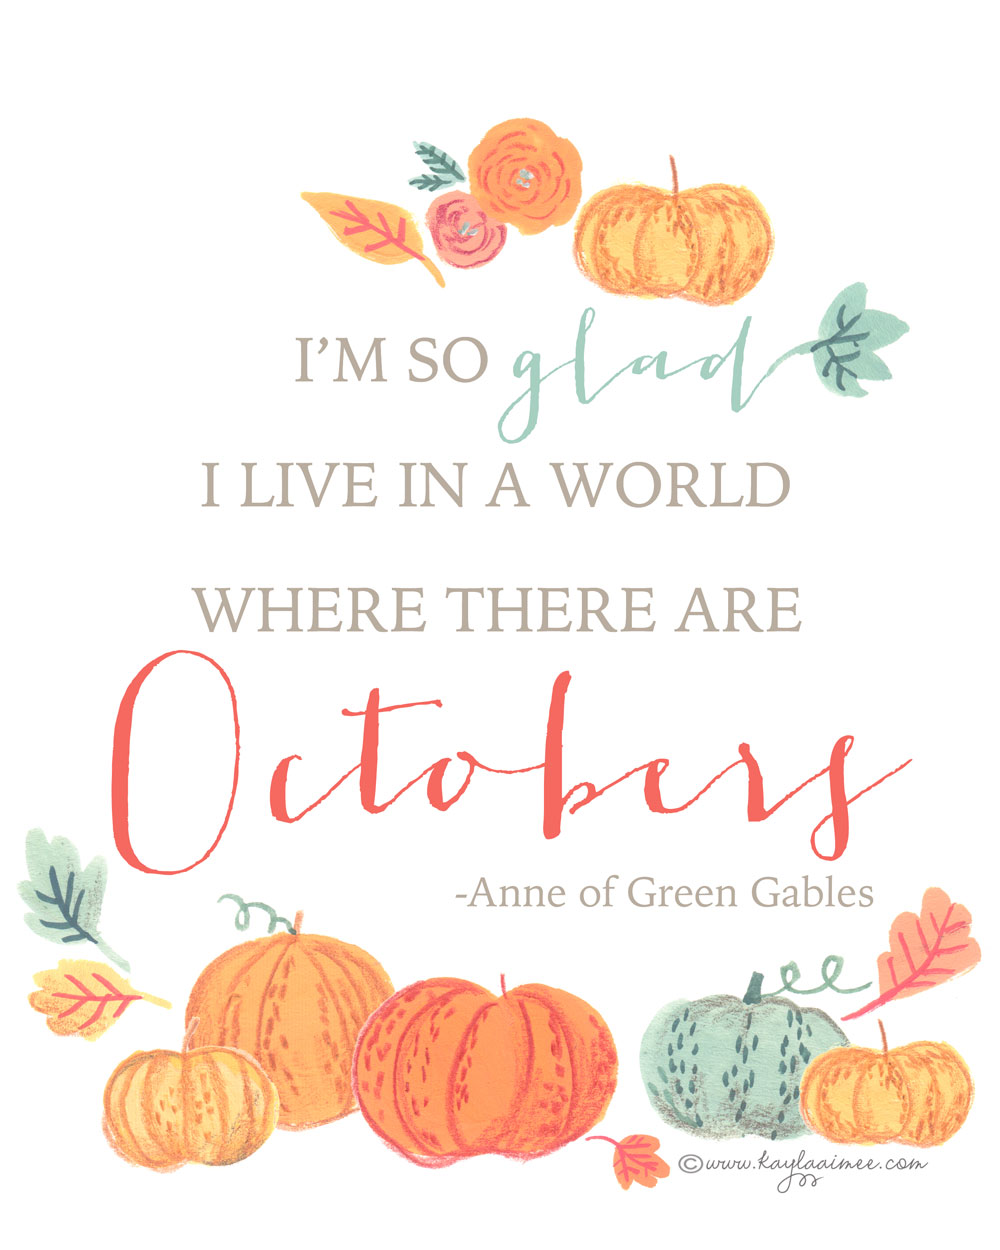 So glad I live in a world where there are Octobers Anne of Green Gables POSTER 